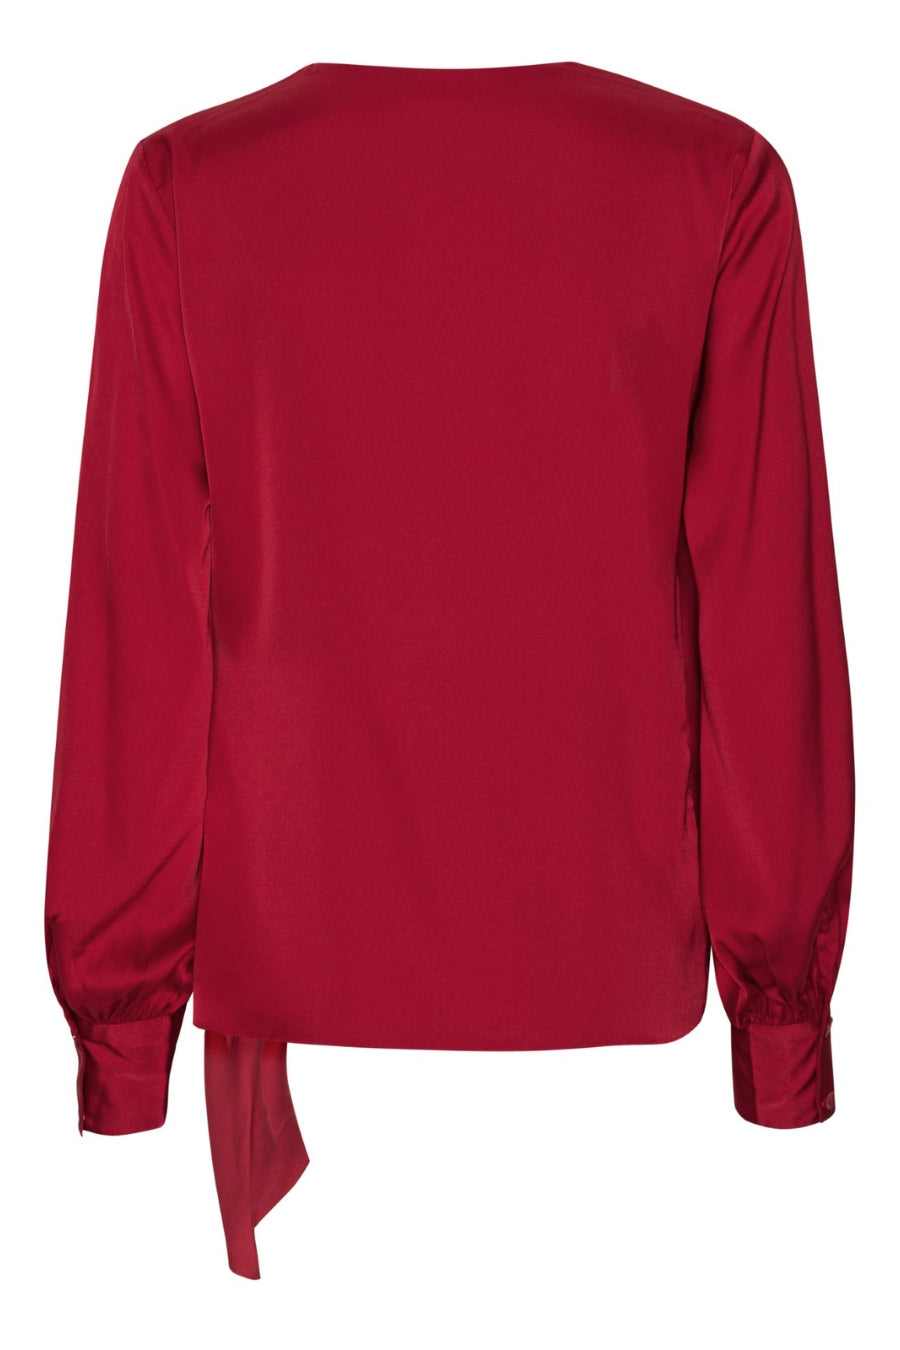 Ines Blouse- Deep Red